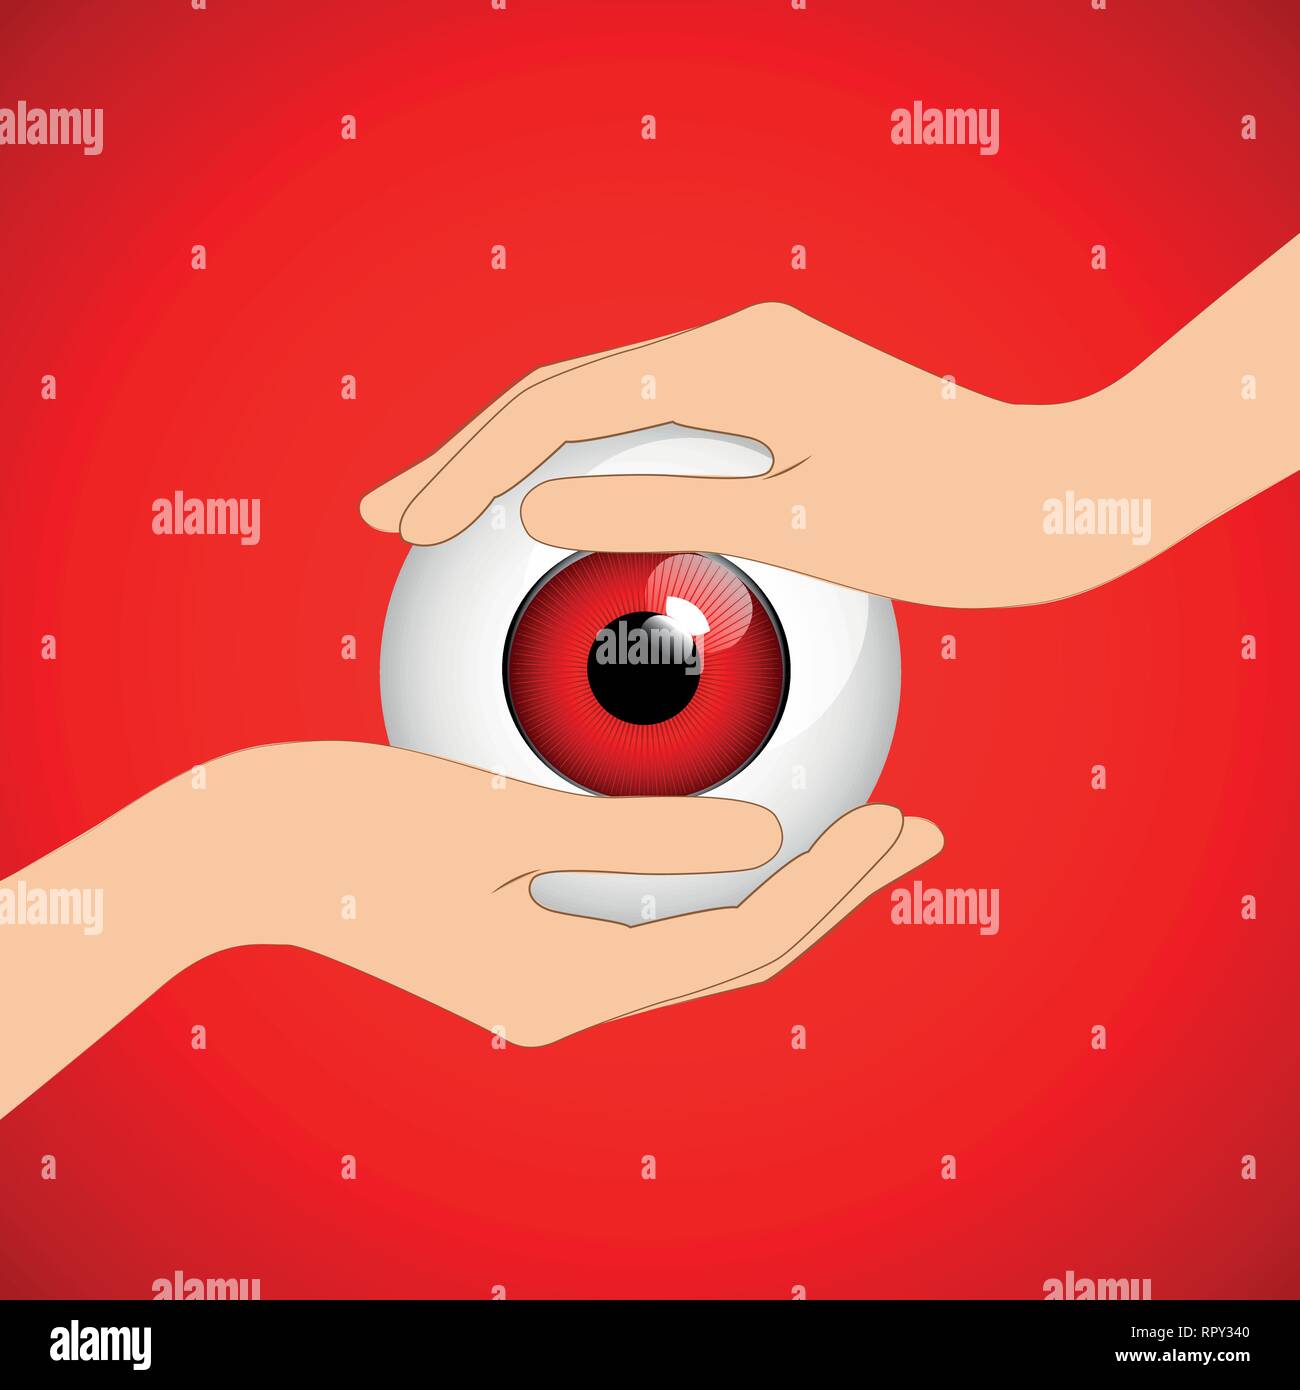 hands hold red irritated eye vector illustration EPS10 Stock Vector